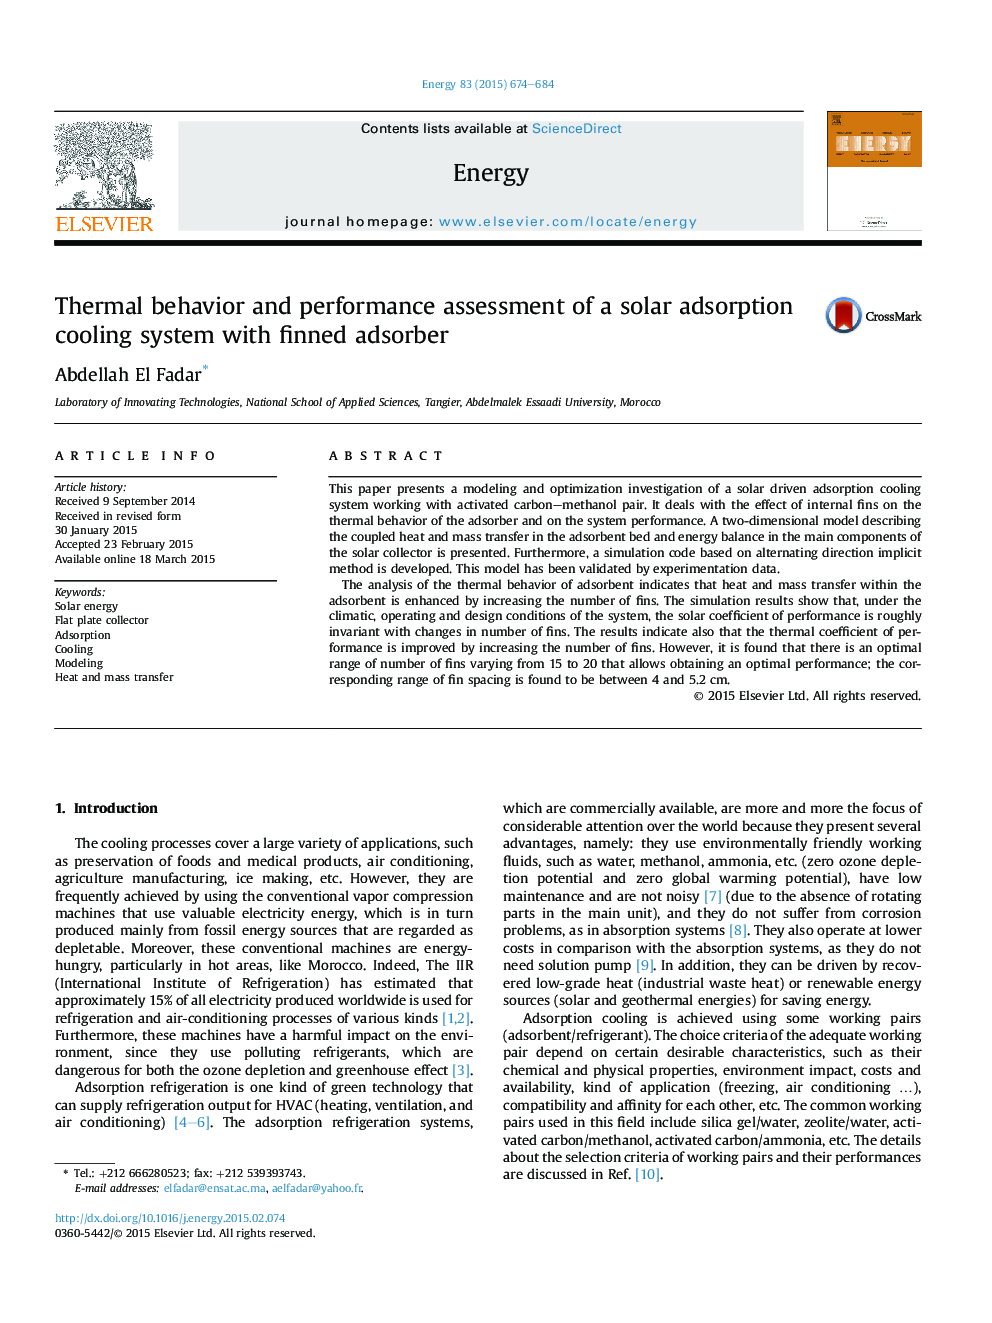 Thermal behavior and performance assessment of a solar adsorption cooling system with finned adsorber